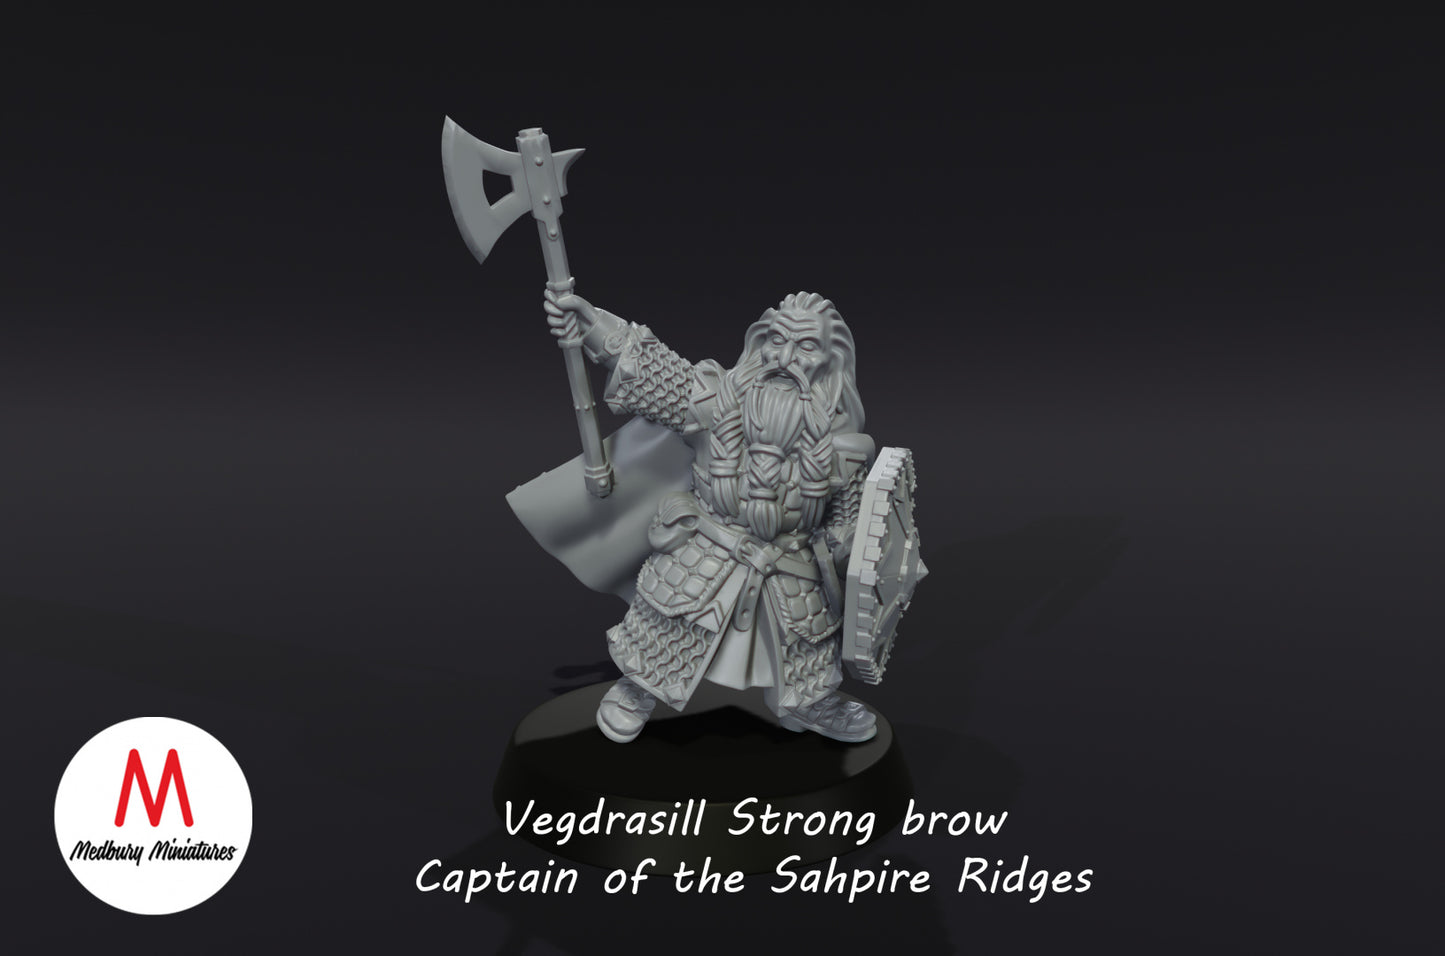 Vegdrasill Strong brow, Captain of the Dwarves of the Saphire Ridges